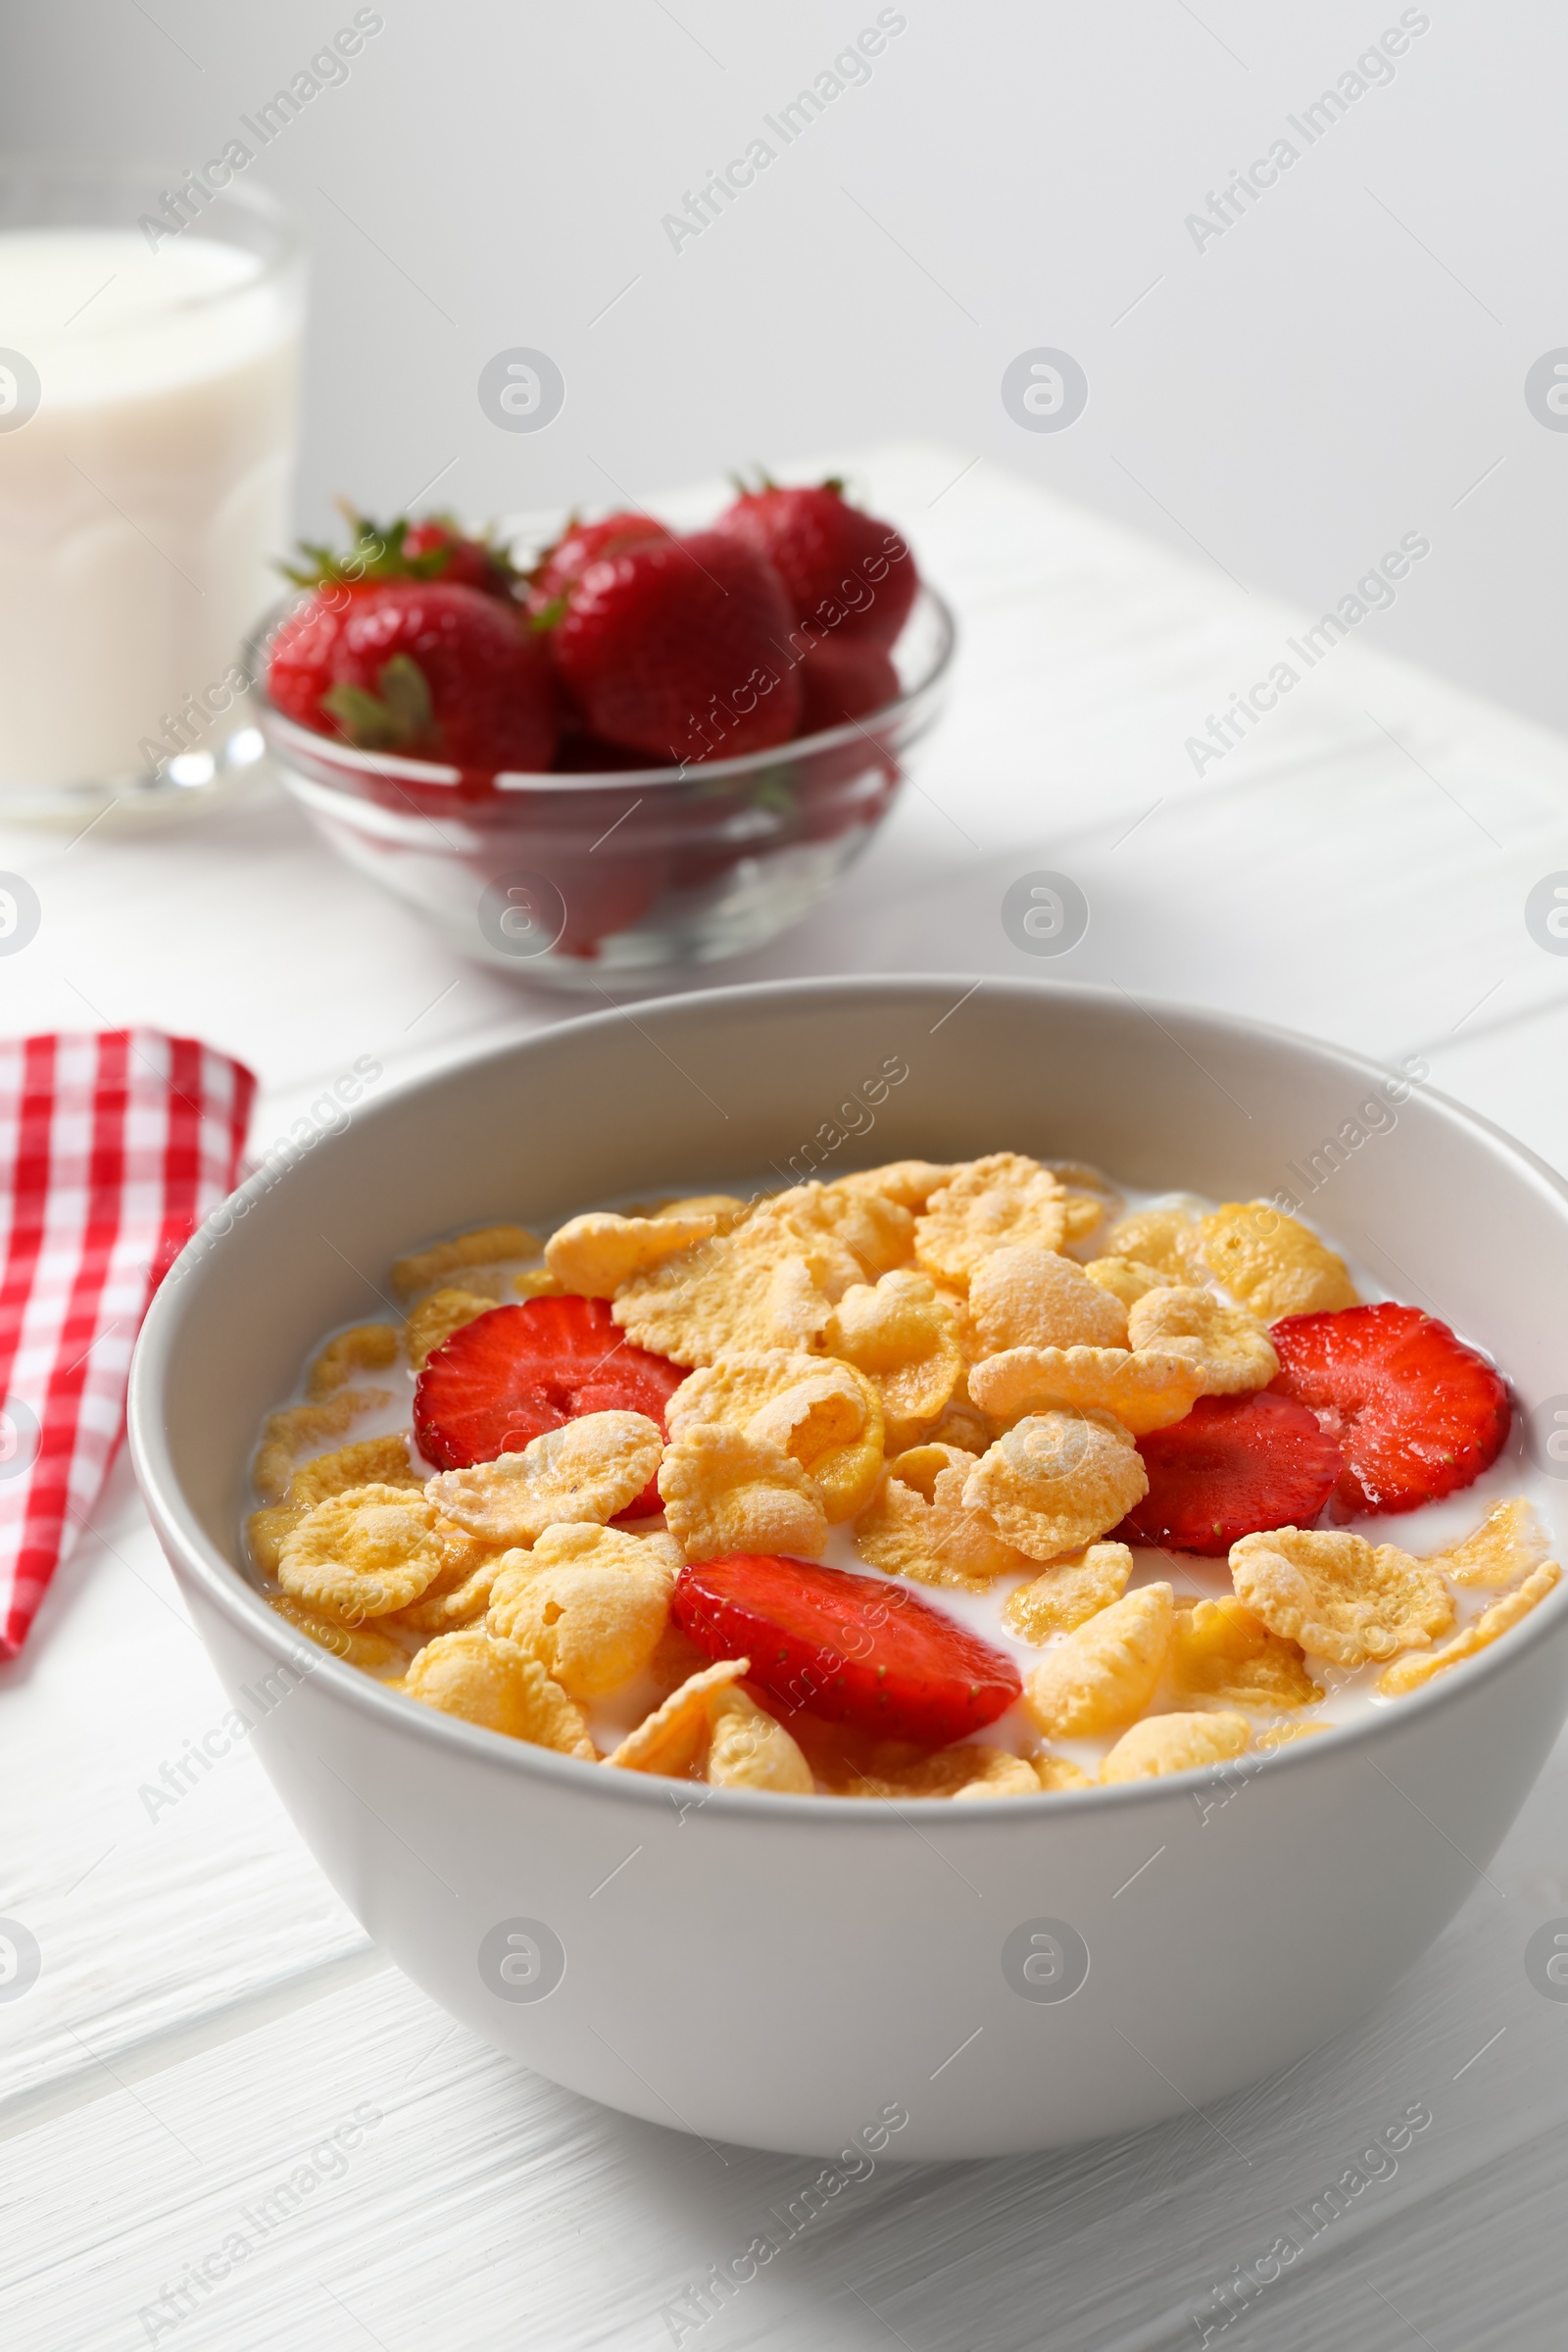 Photo of Corn flakes with strawberries in bowl served on white wooden table